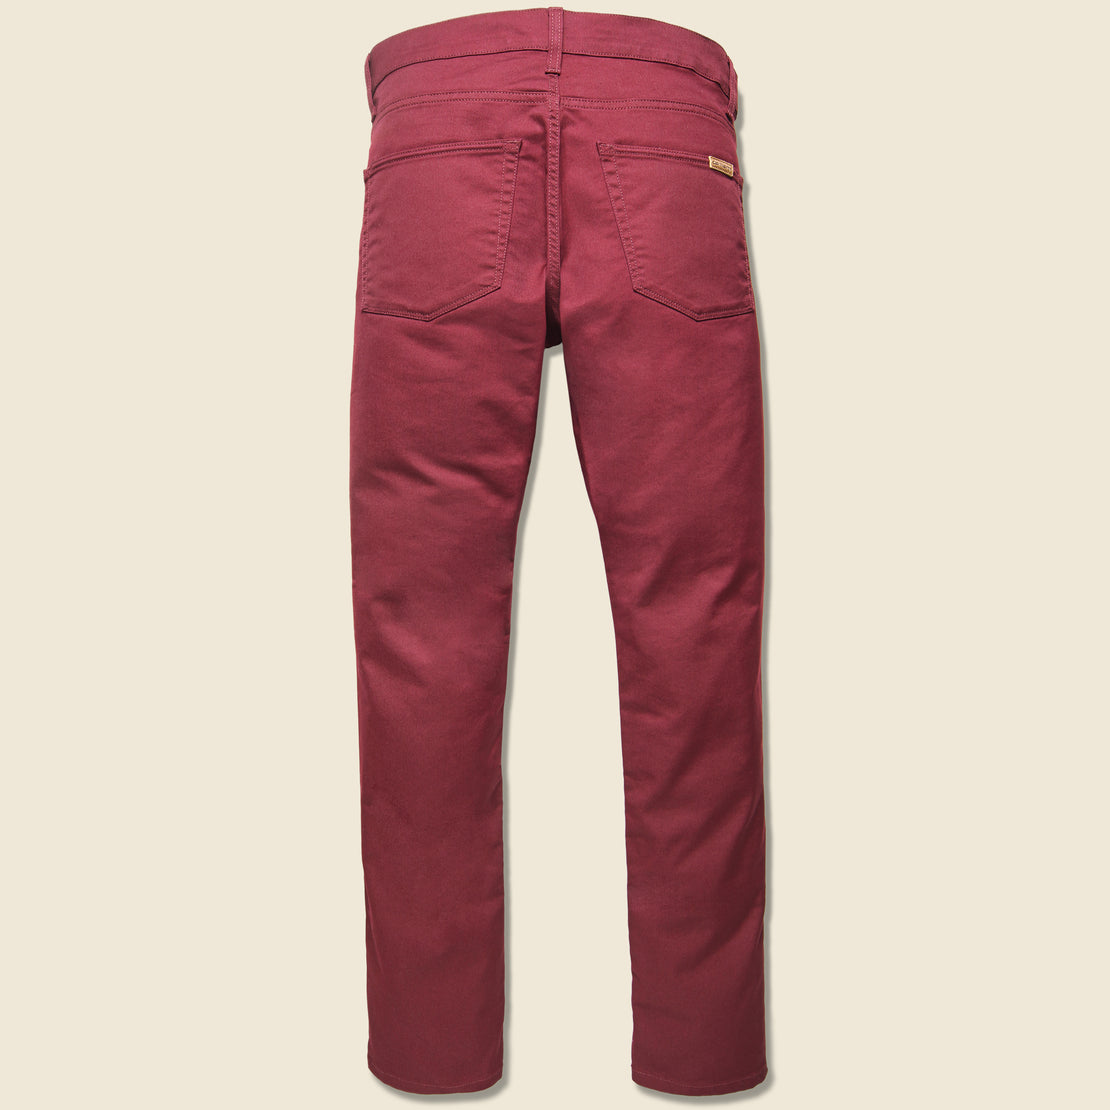 Vicious Pant - Mulberry